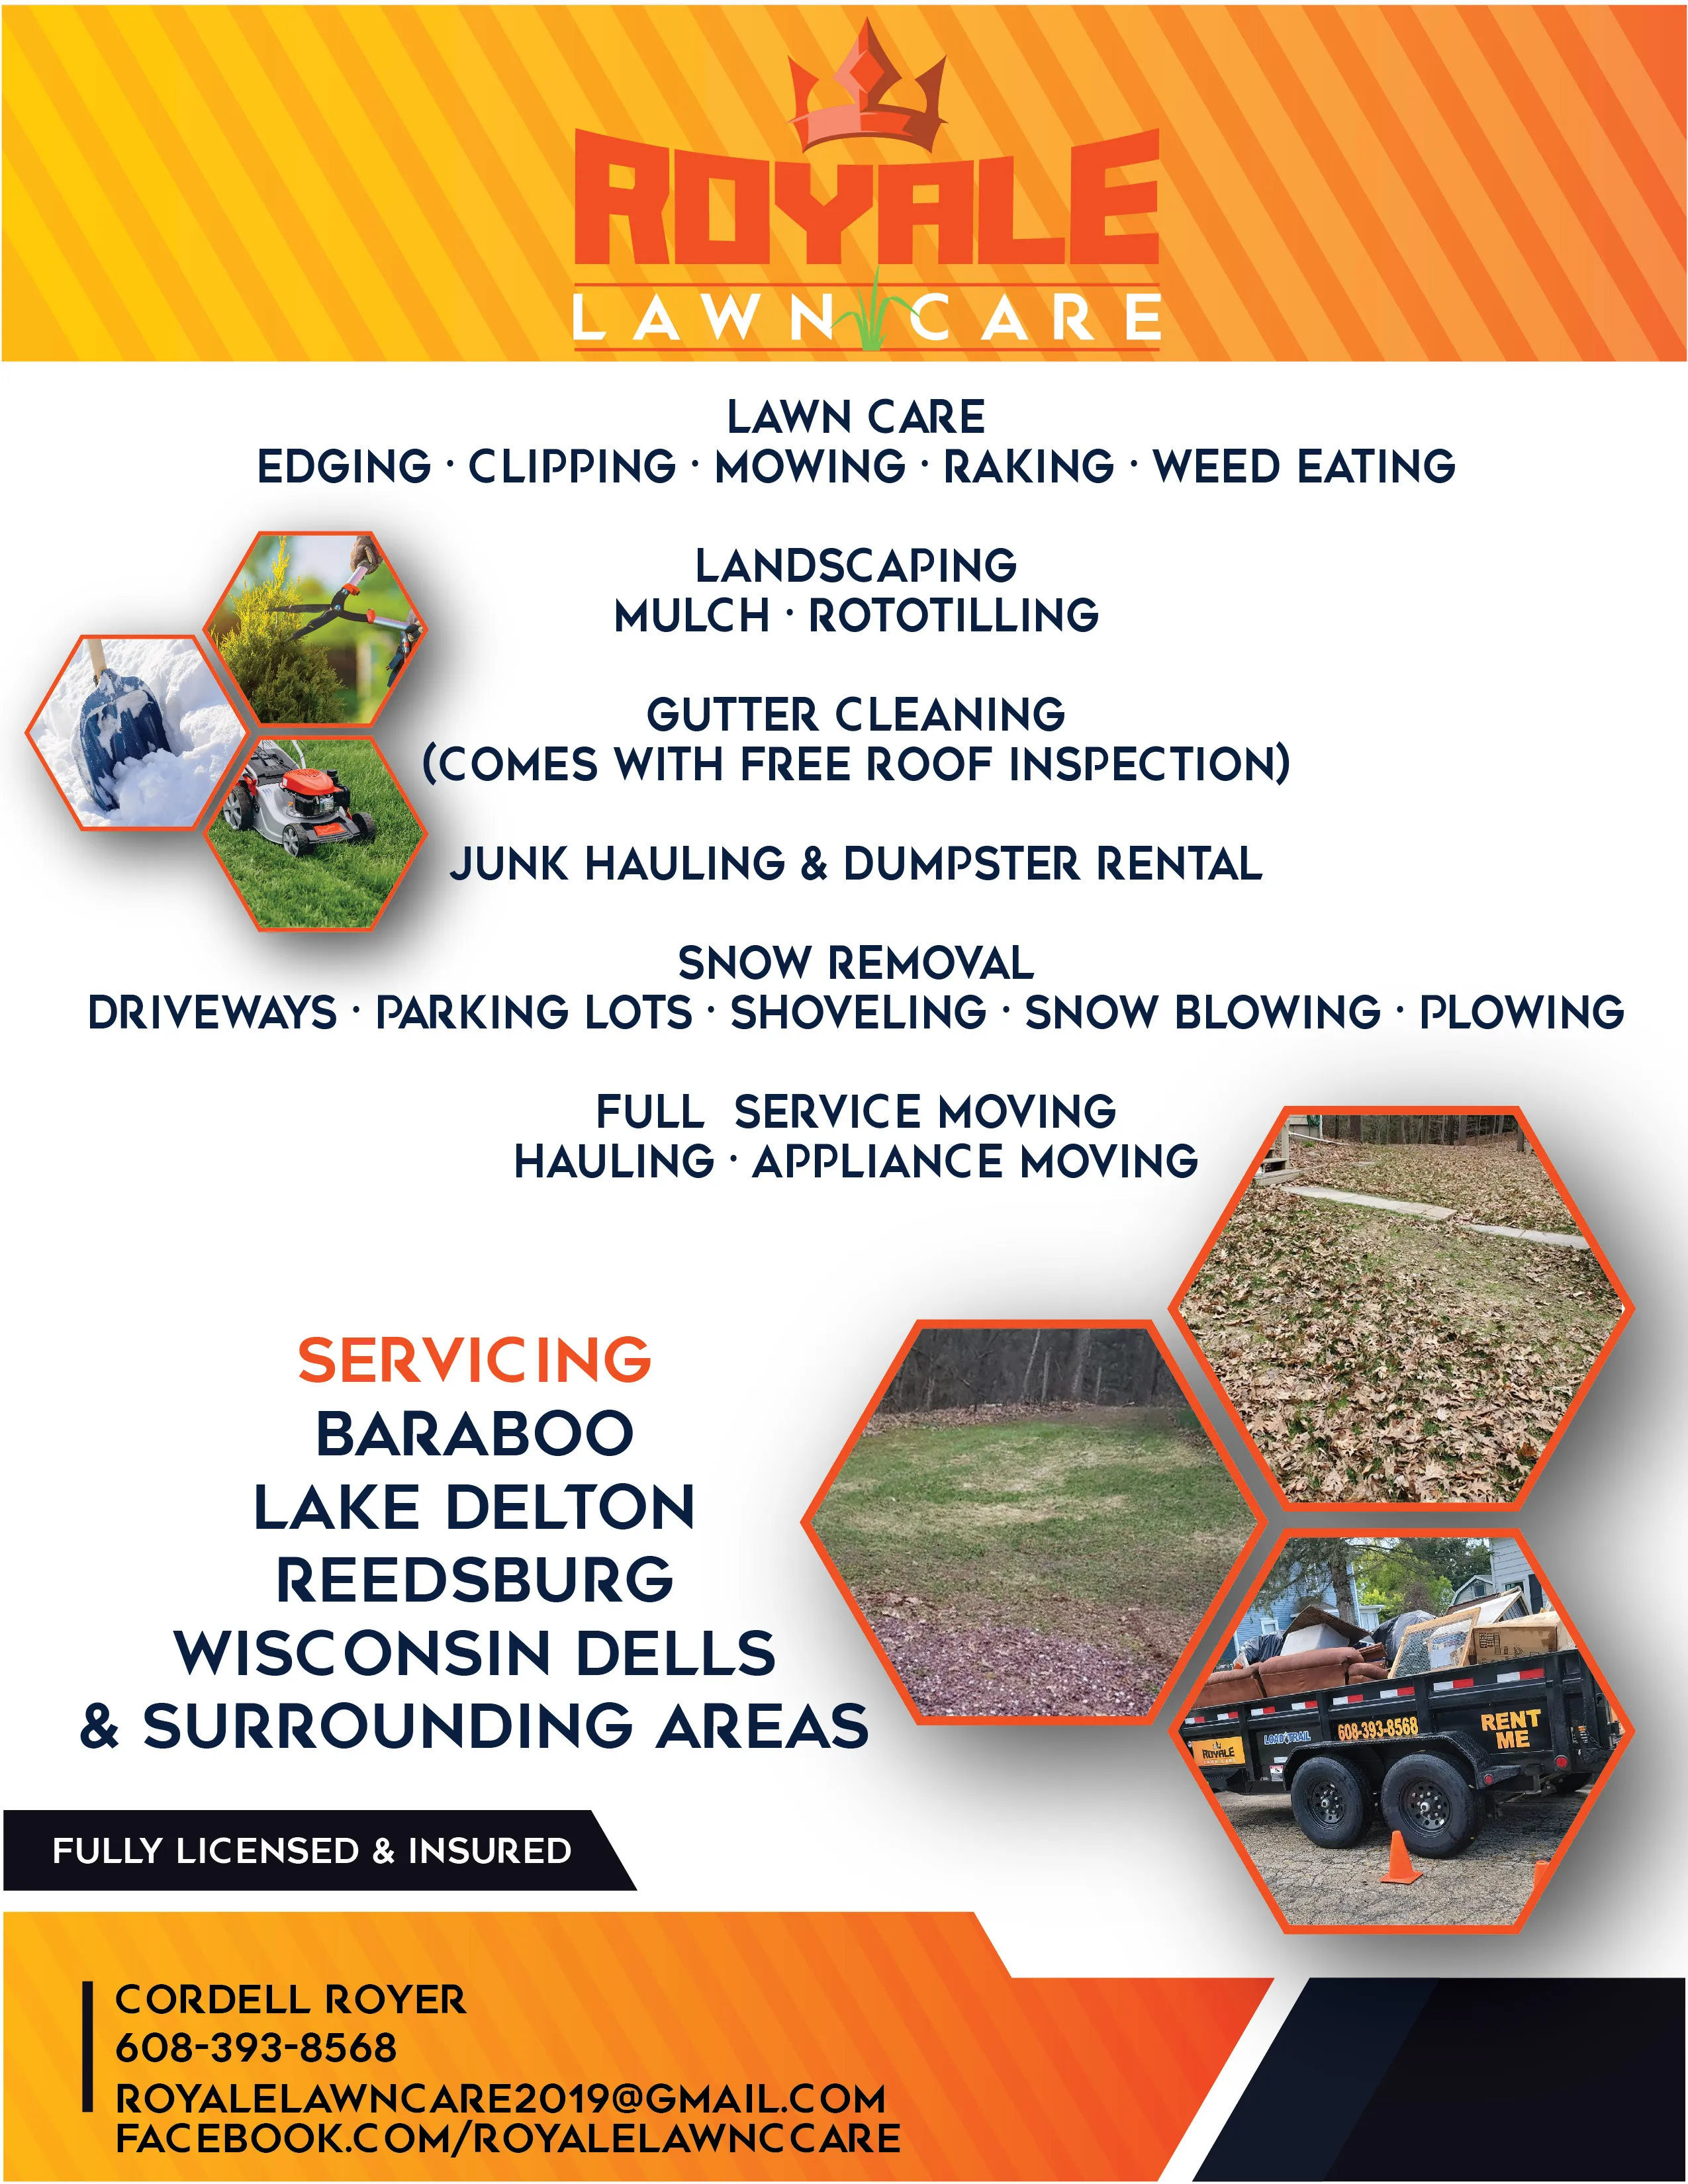 Lawn Care for Royale Lawn Care and Maintenance LLC in Reedsburg, WI